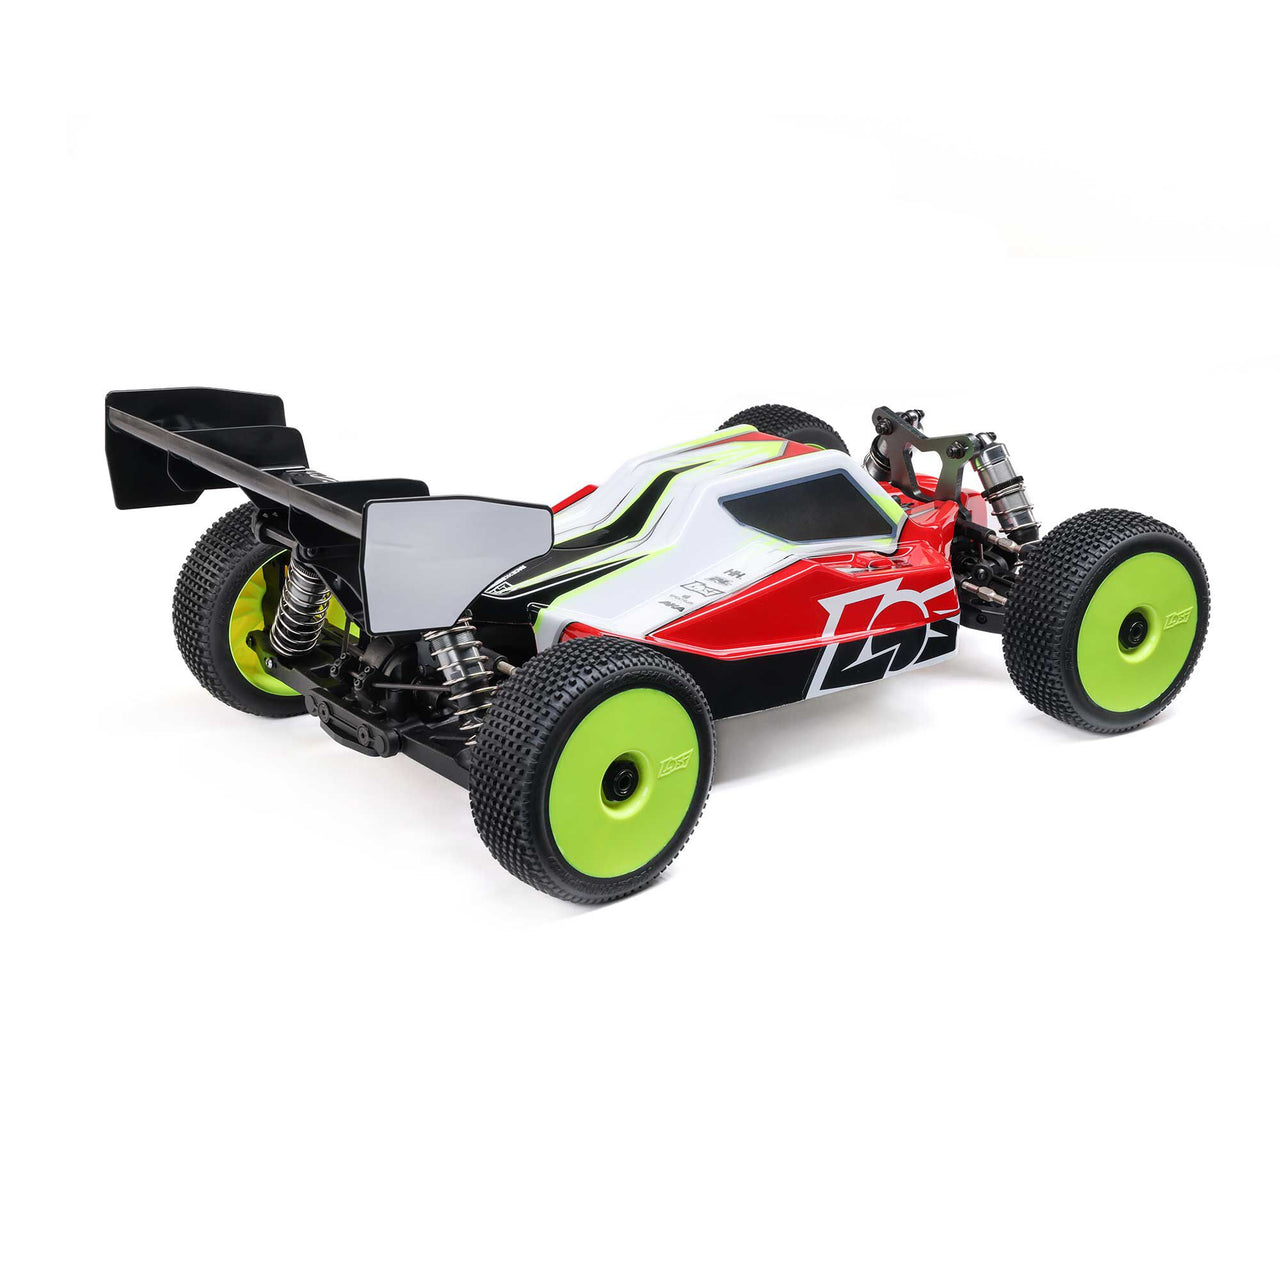 LOS04018 1/8 8IGHT-XE 4X4 Sensored Brushless Racing Buggy RTR